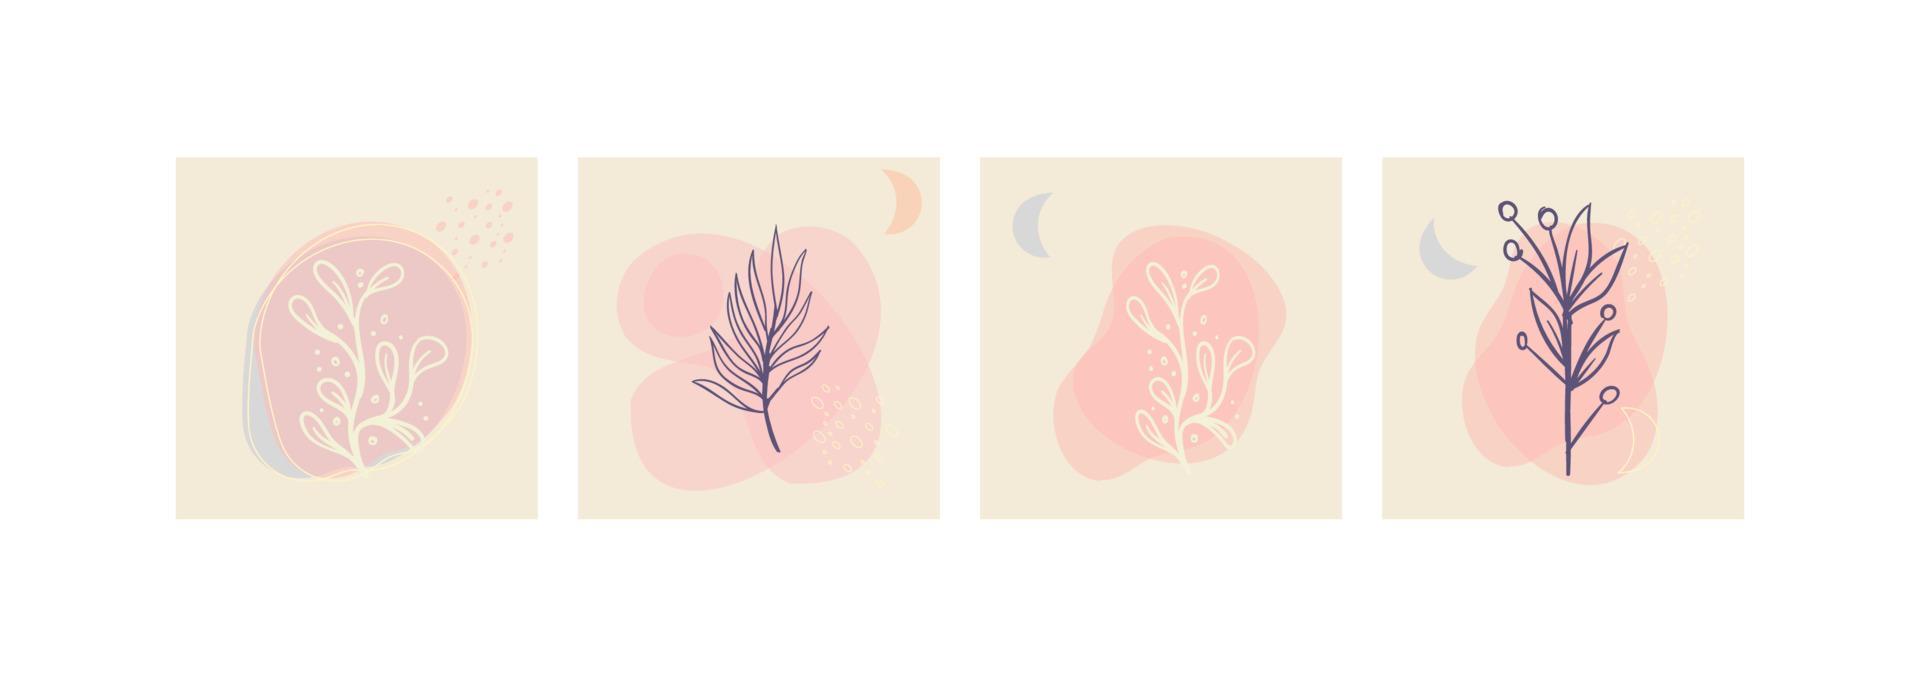 Aesthetic nature plant background  with abstract organic shapes in pastel color palette. vector